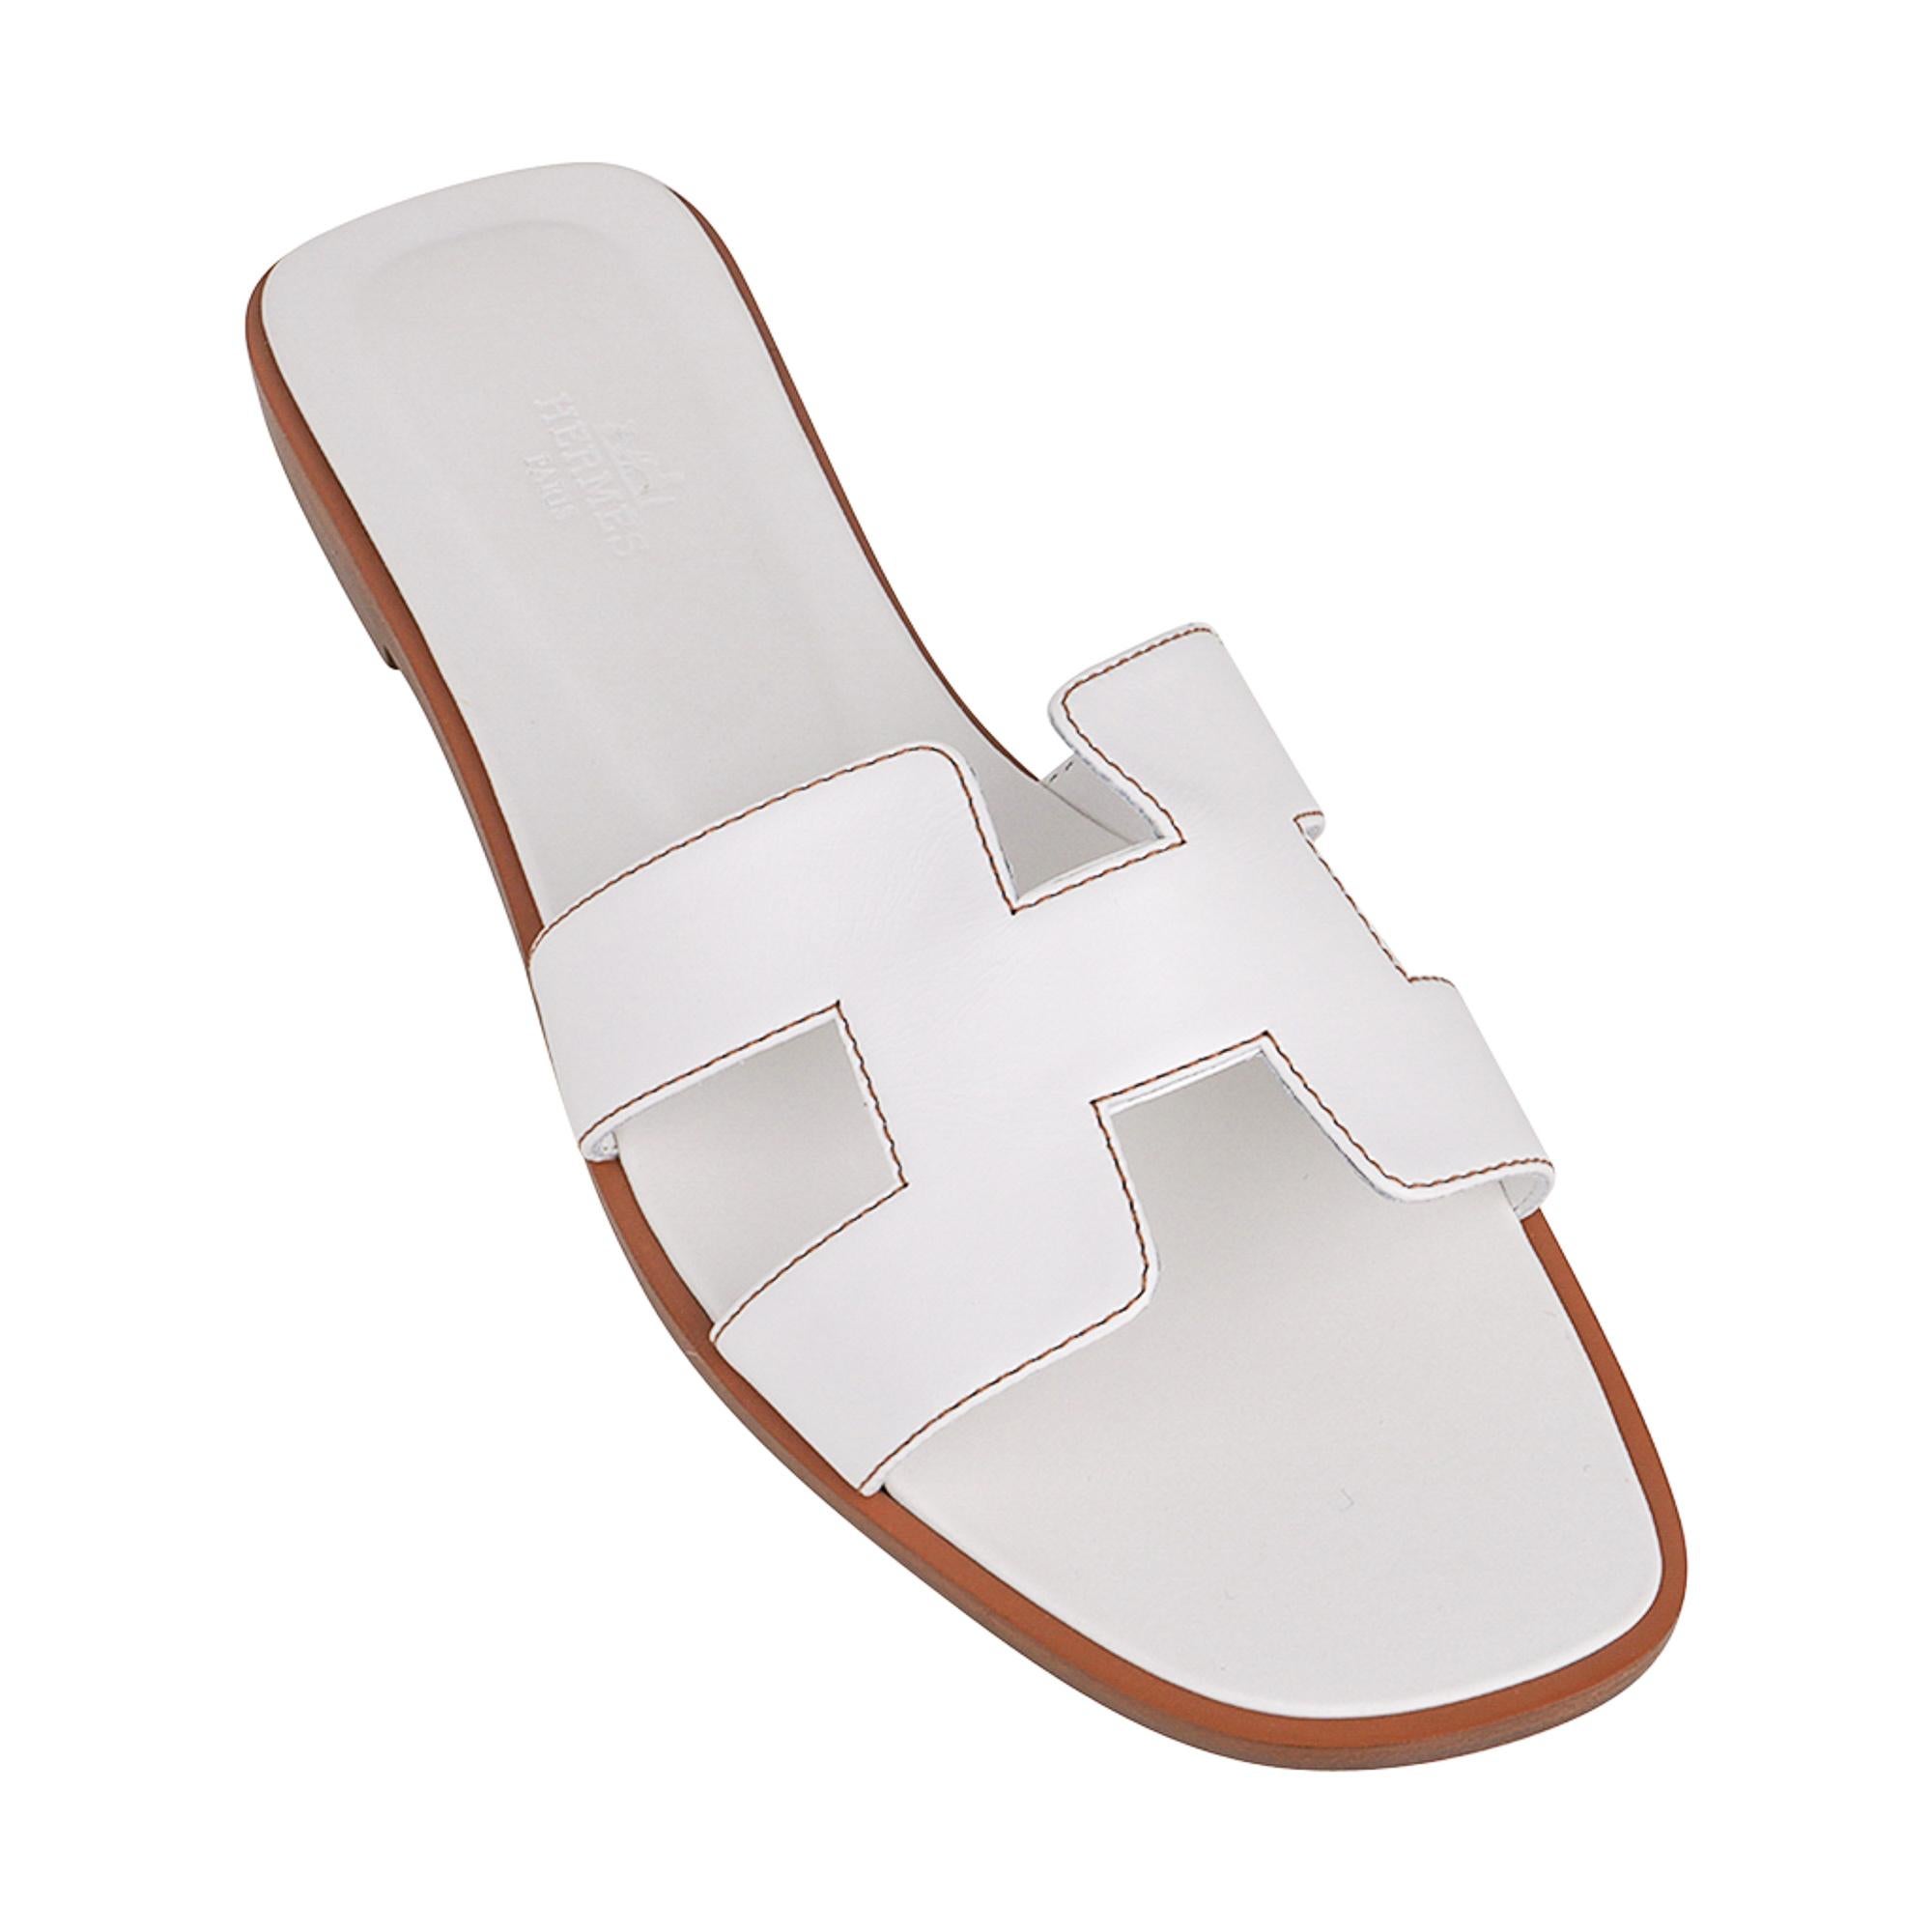 Mightychic offers a pair of Hermes Oran White leather sandals.
The iconic top stitched H cutout over the top of the foot.
This Hermes Oran slide shoe is accentuated with Havane topstitch.
Natural wood heel with leather sole.
Comes with sleepers and